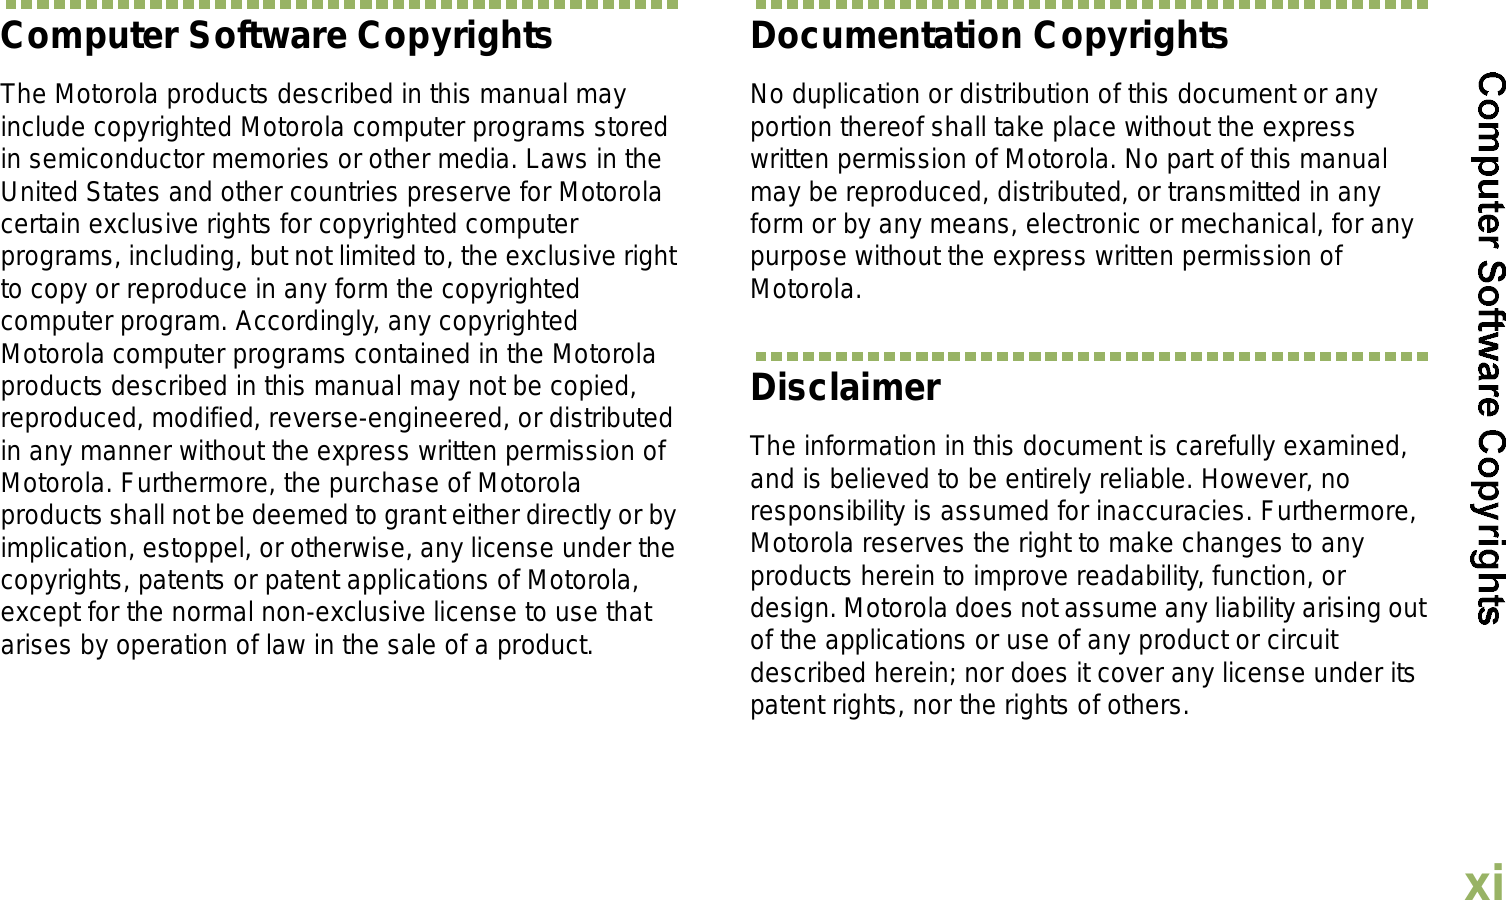 EnglishxiComputer Software CopyrightsThe Motorola products described in this manual may include copyrighted Motorola computer programs stored in semiconductor memories or other media. Laws in the United States and other countries preserve for Motorola certain exclusive rights for copyrighted computer programs, including, but not limited to, the exclusive right to copy or reproduce in any form the copyrighted computer program. Accordingly, any copyrighted Motorola computer programs contained in the Motorola products described in this manual may not be copied, reproduced, modified, reverse-engineered, or distributed in any manner without the express written permission of Motorola. Furthermore, the purchase of Motorola products shall not be deemed to grant either directly or by implication, estoppel, or otherwise, any license under the copyrights, patents or patent applications of Motorola, except for the normal non-exclusive license to use that arises by operation of law in the sale of a product.Documentation CopyrightsNo duplication or distribution of this document or any portion thereof shall take place without the express written permission of Motorola. No part of this manual may be reproduced, distributed, or transmitted in any form or by any means, electronic or mechanical, for any purpose without the express written permission of Motorola.DisclaimerThe information in this document is carefully examined, and is believed to be entirely reliable. However, no responsibility is assumed for inaccuracies. Furthermore, Motorola reserves the right to make changes to any products herein to improve readability, function, or design. Motorola does not assume any liability arising out of the applications or use of any product or circuit described herein; nor does it cover any license under its patent rights, nor the rights of others. 